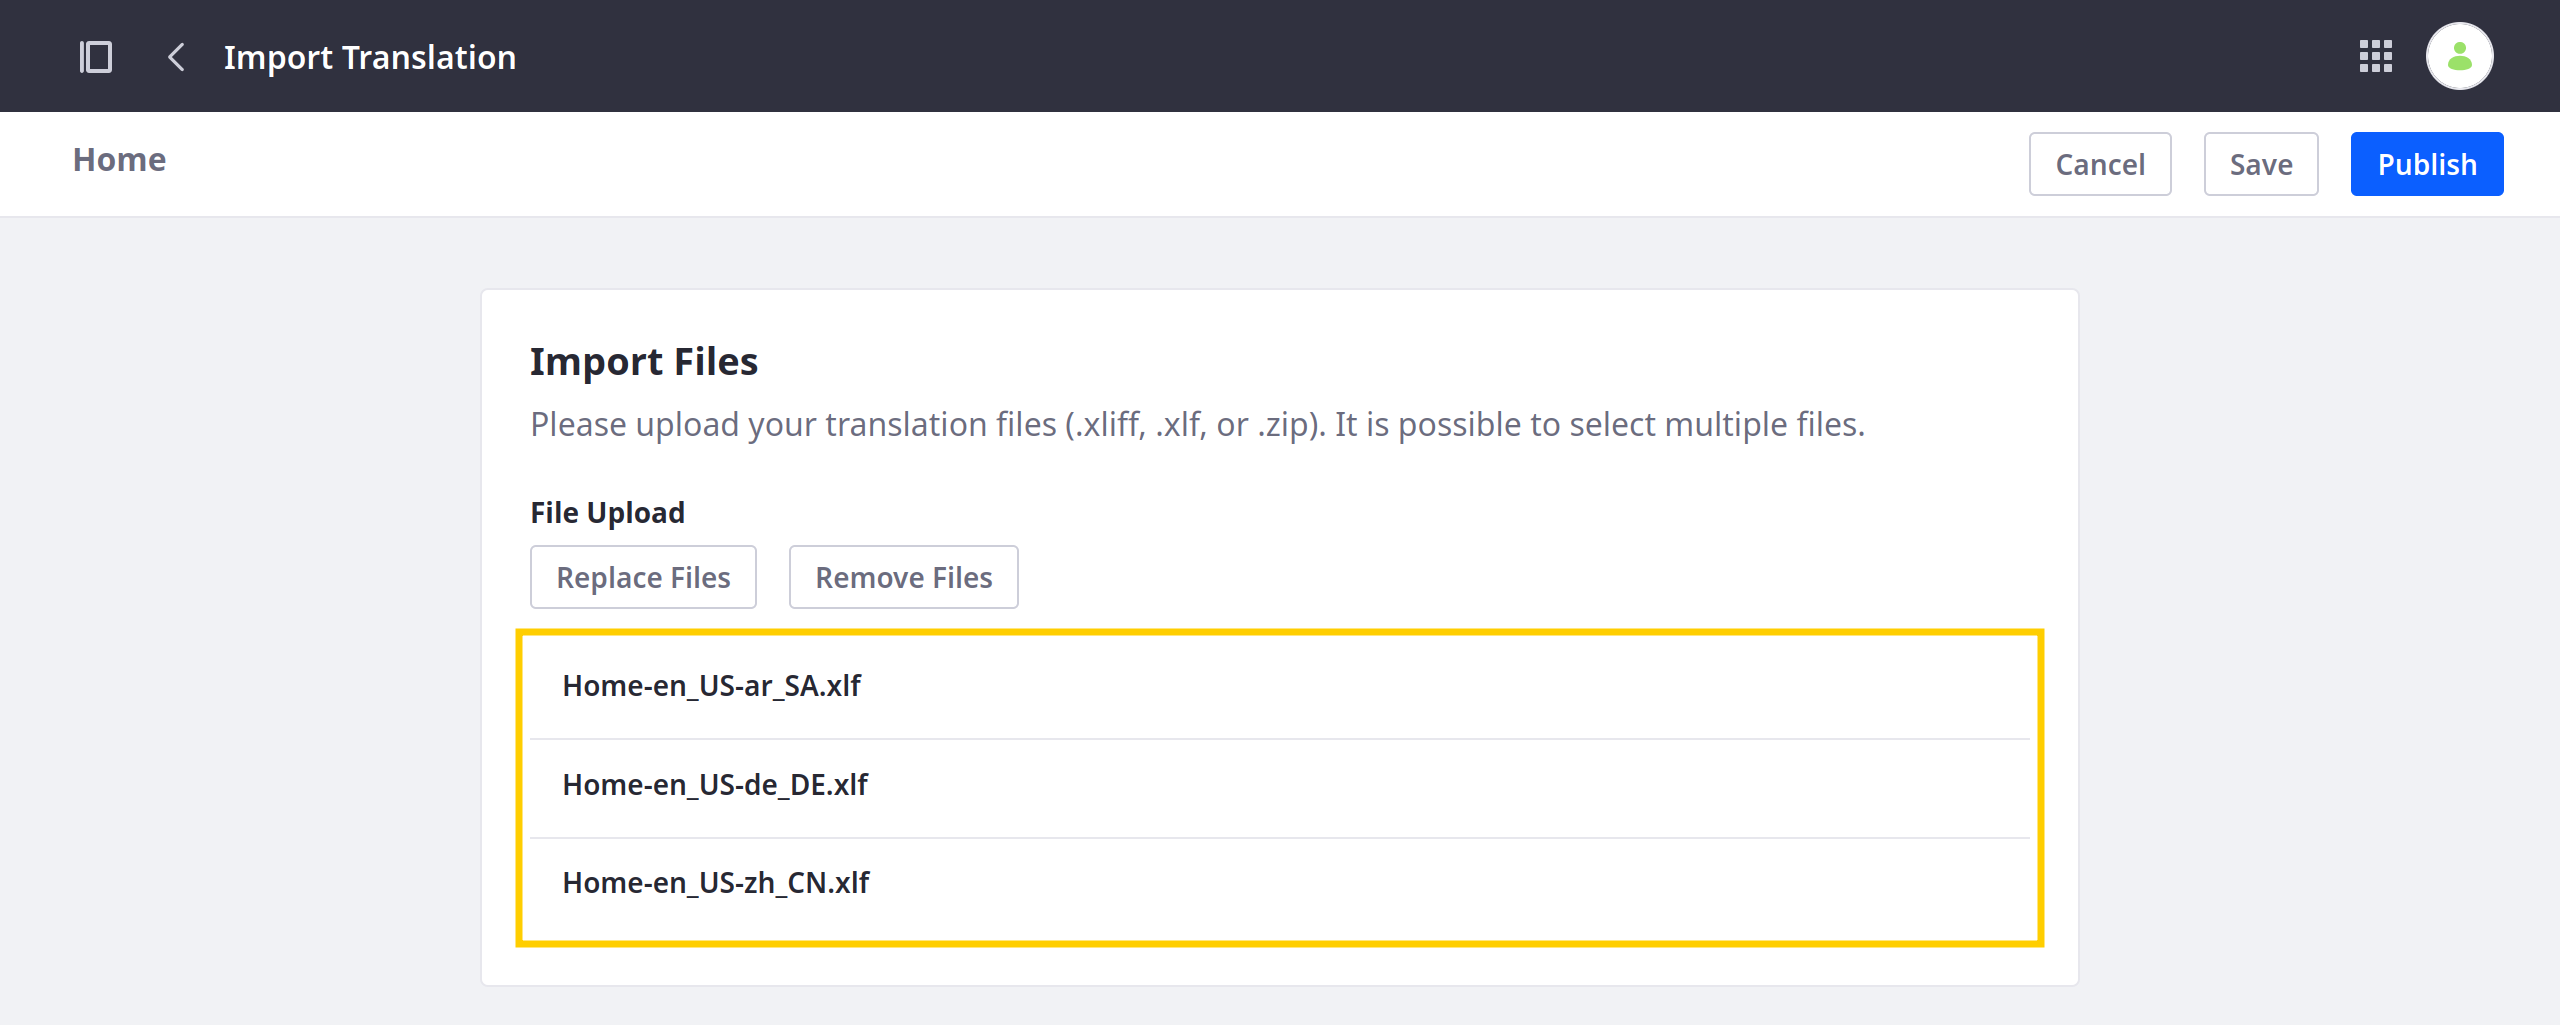 Select the translation files you want to import.